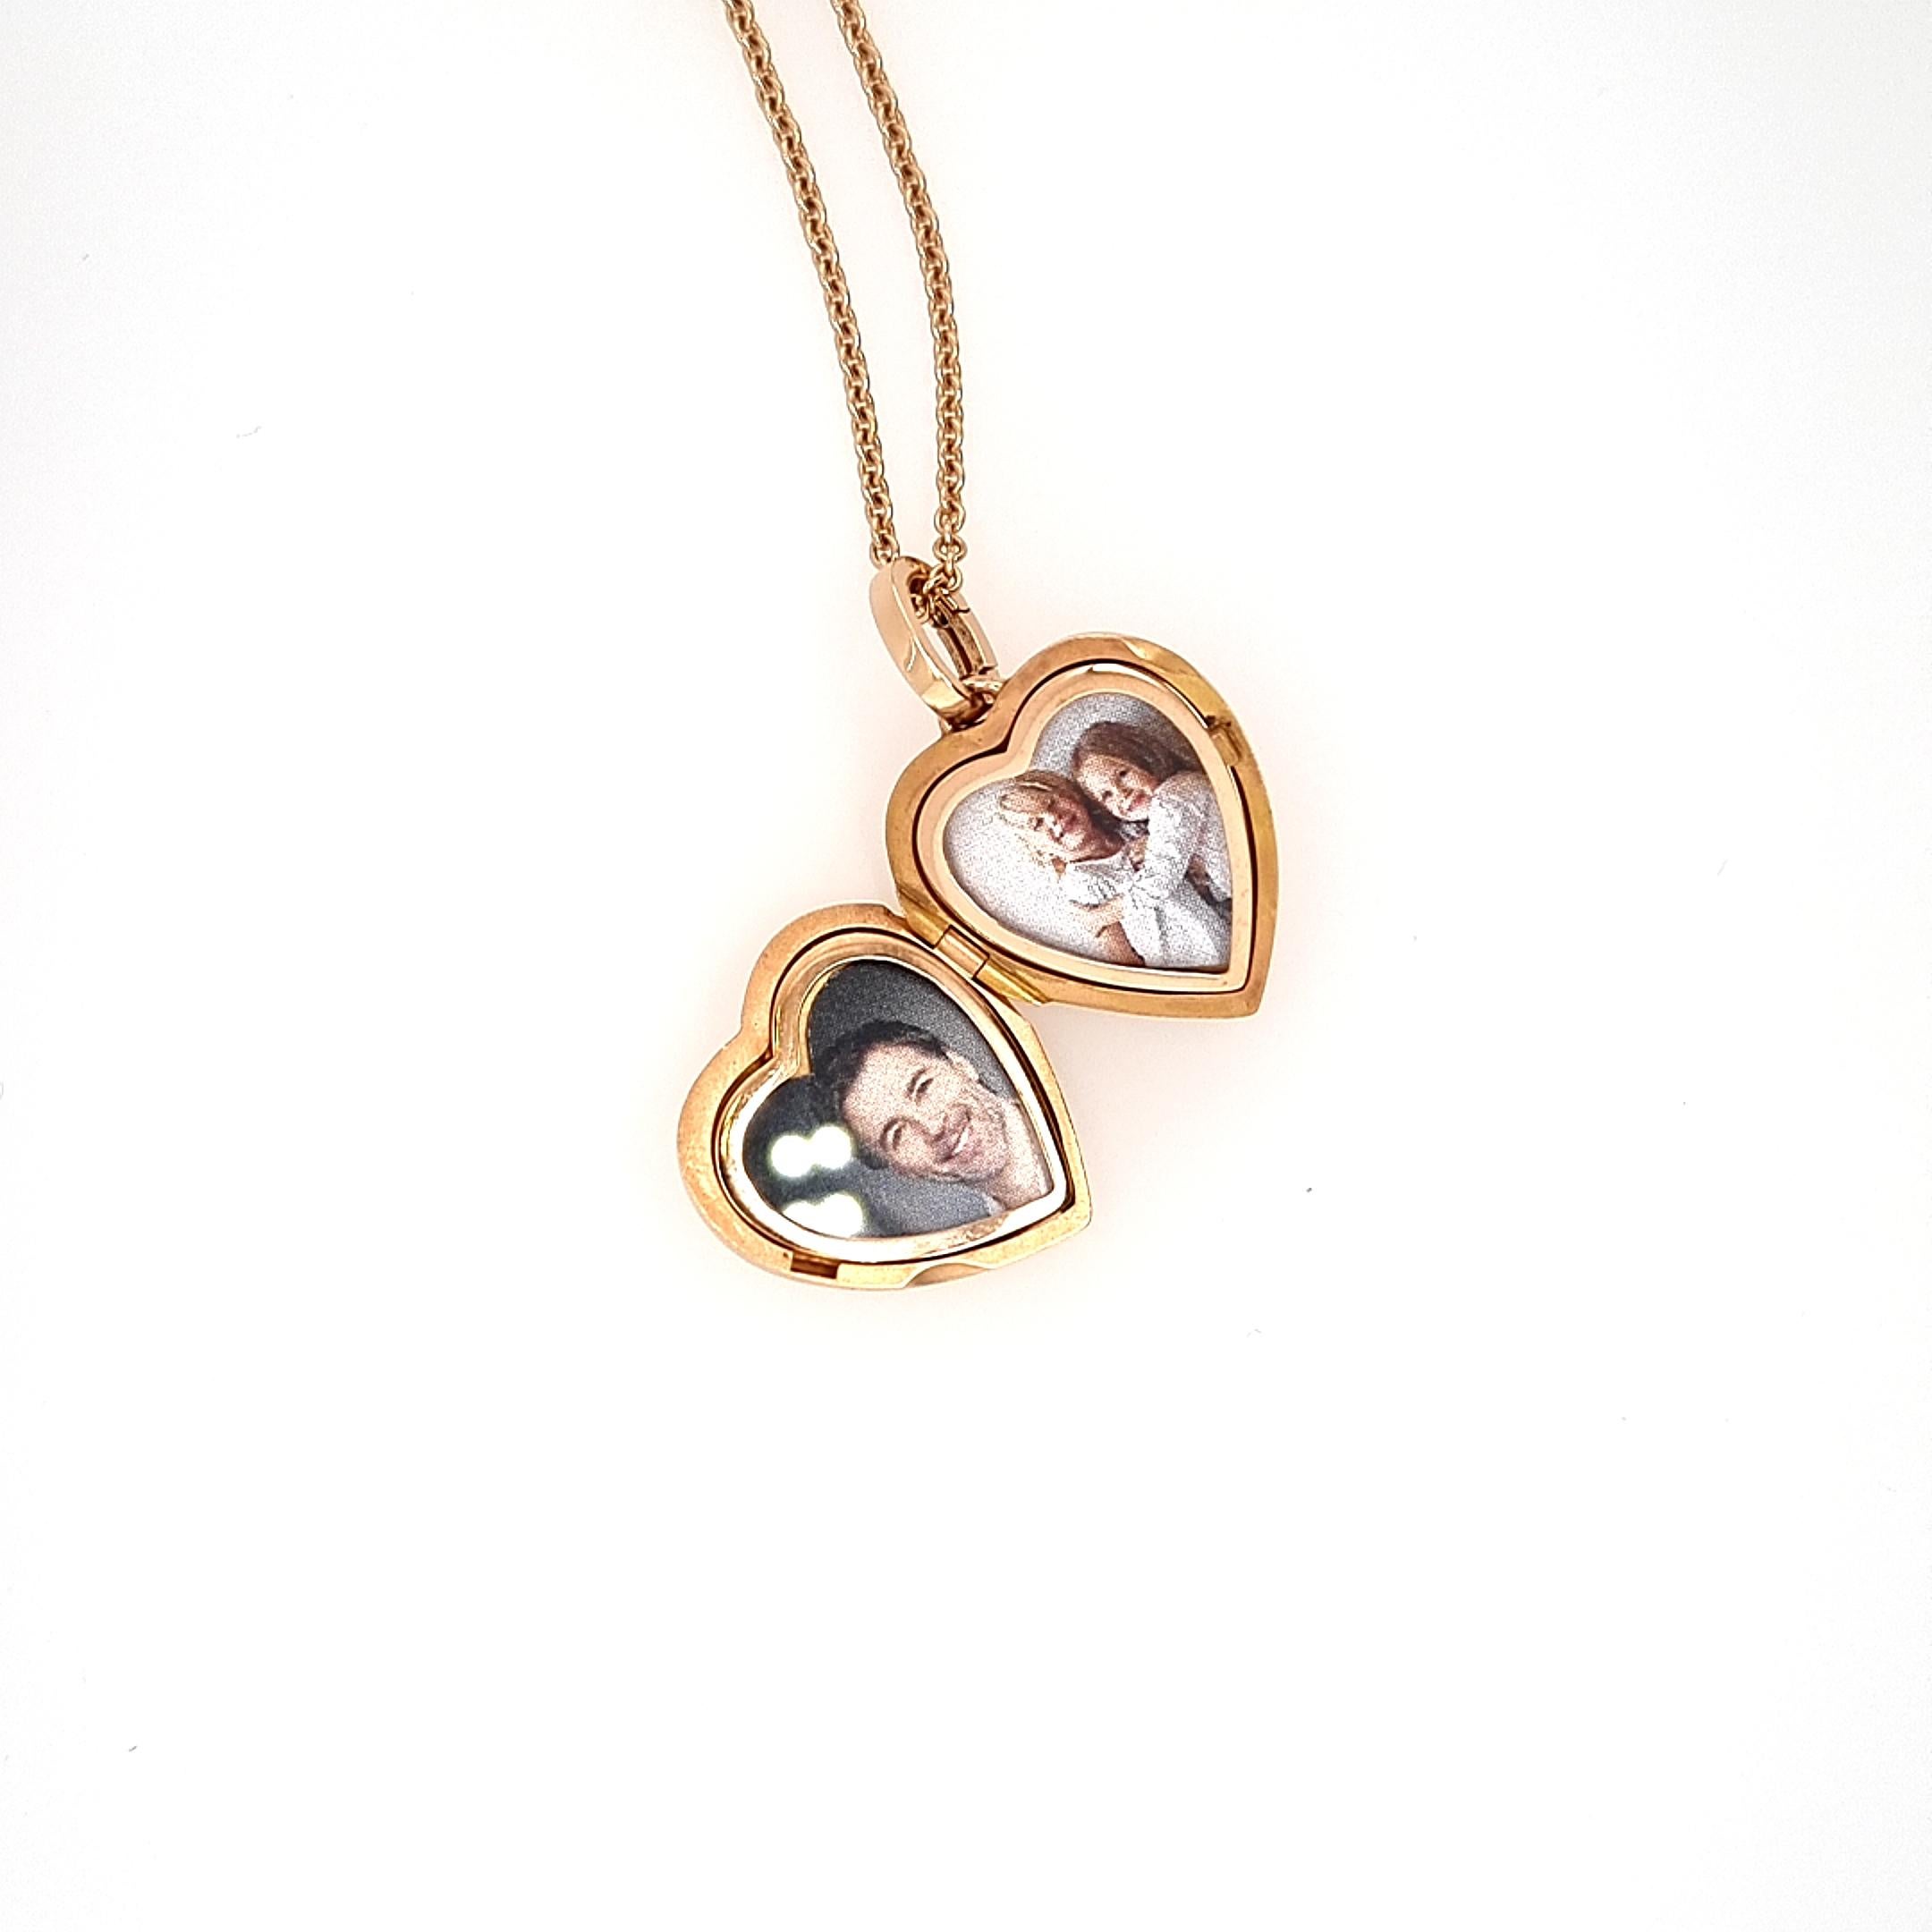 Heart Shaped Locket Pendant by Victor Mayer, 18k Rose Gold, 8 Diamonds 0.16ct For Sale 1